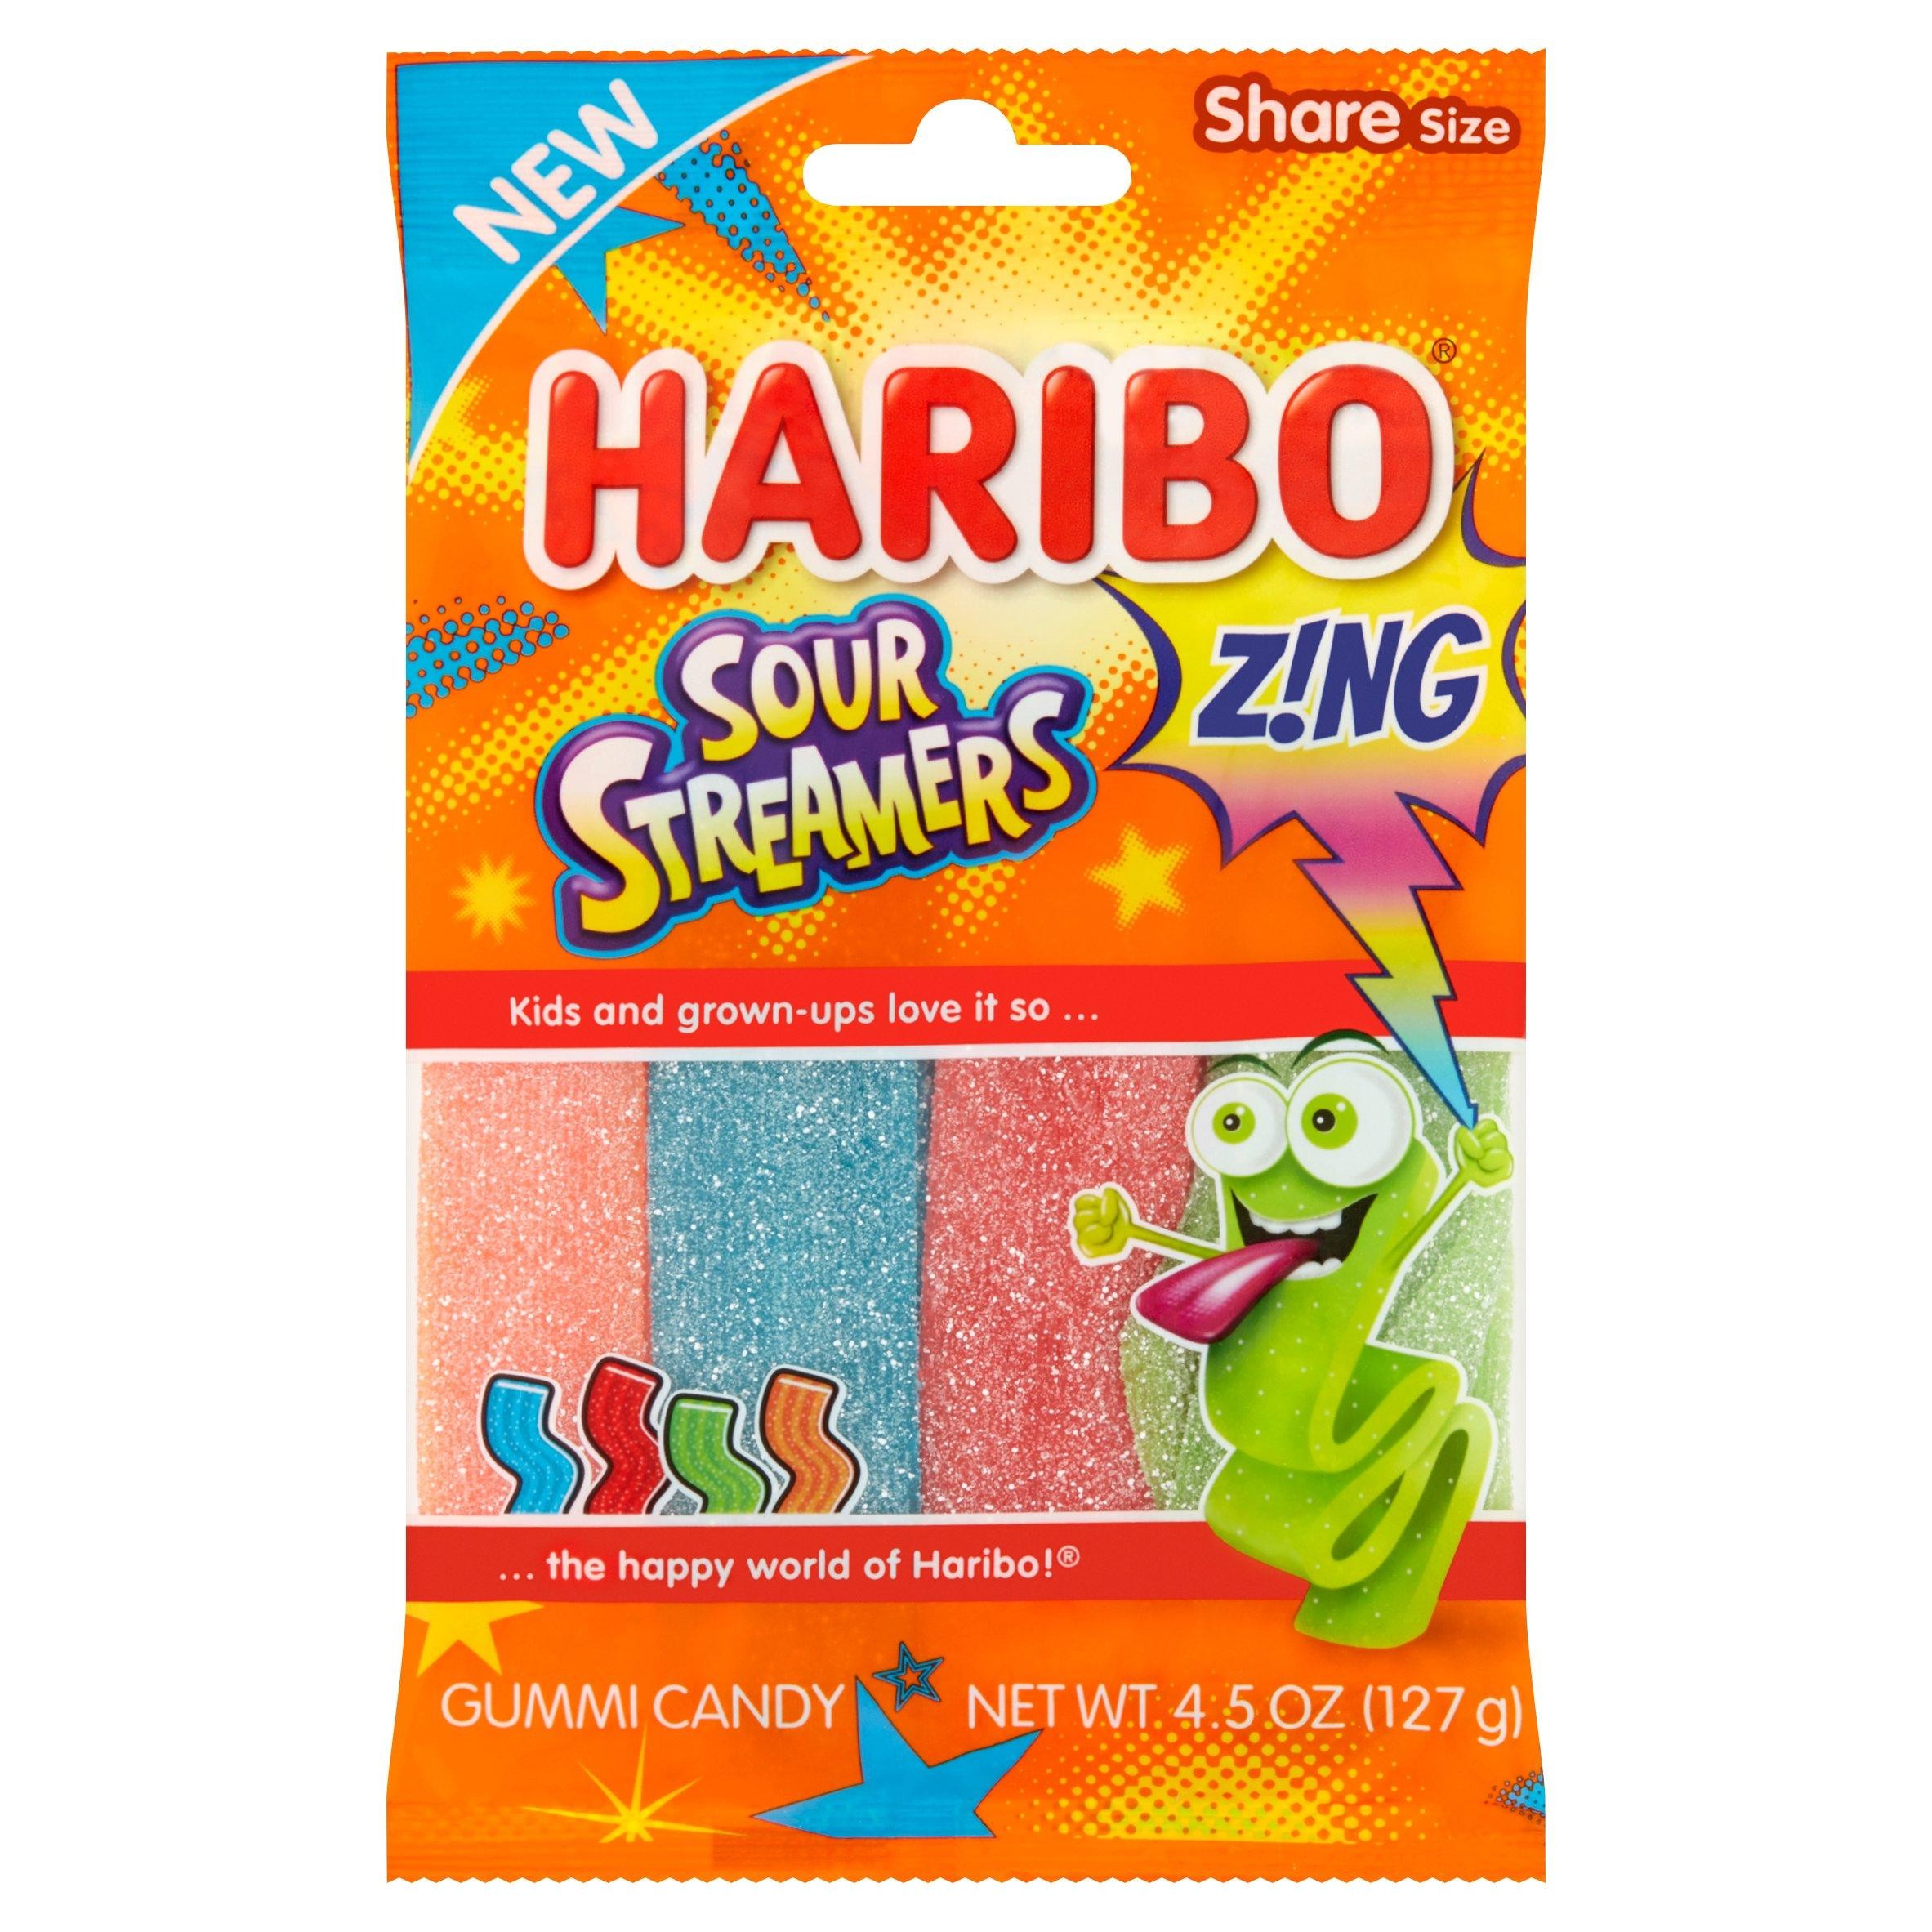 Haribo Z NGS Streamers Sour Gummi Candy